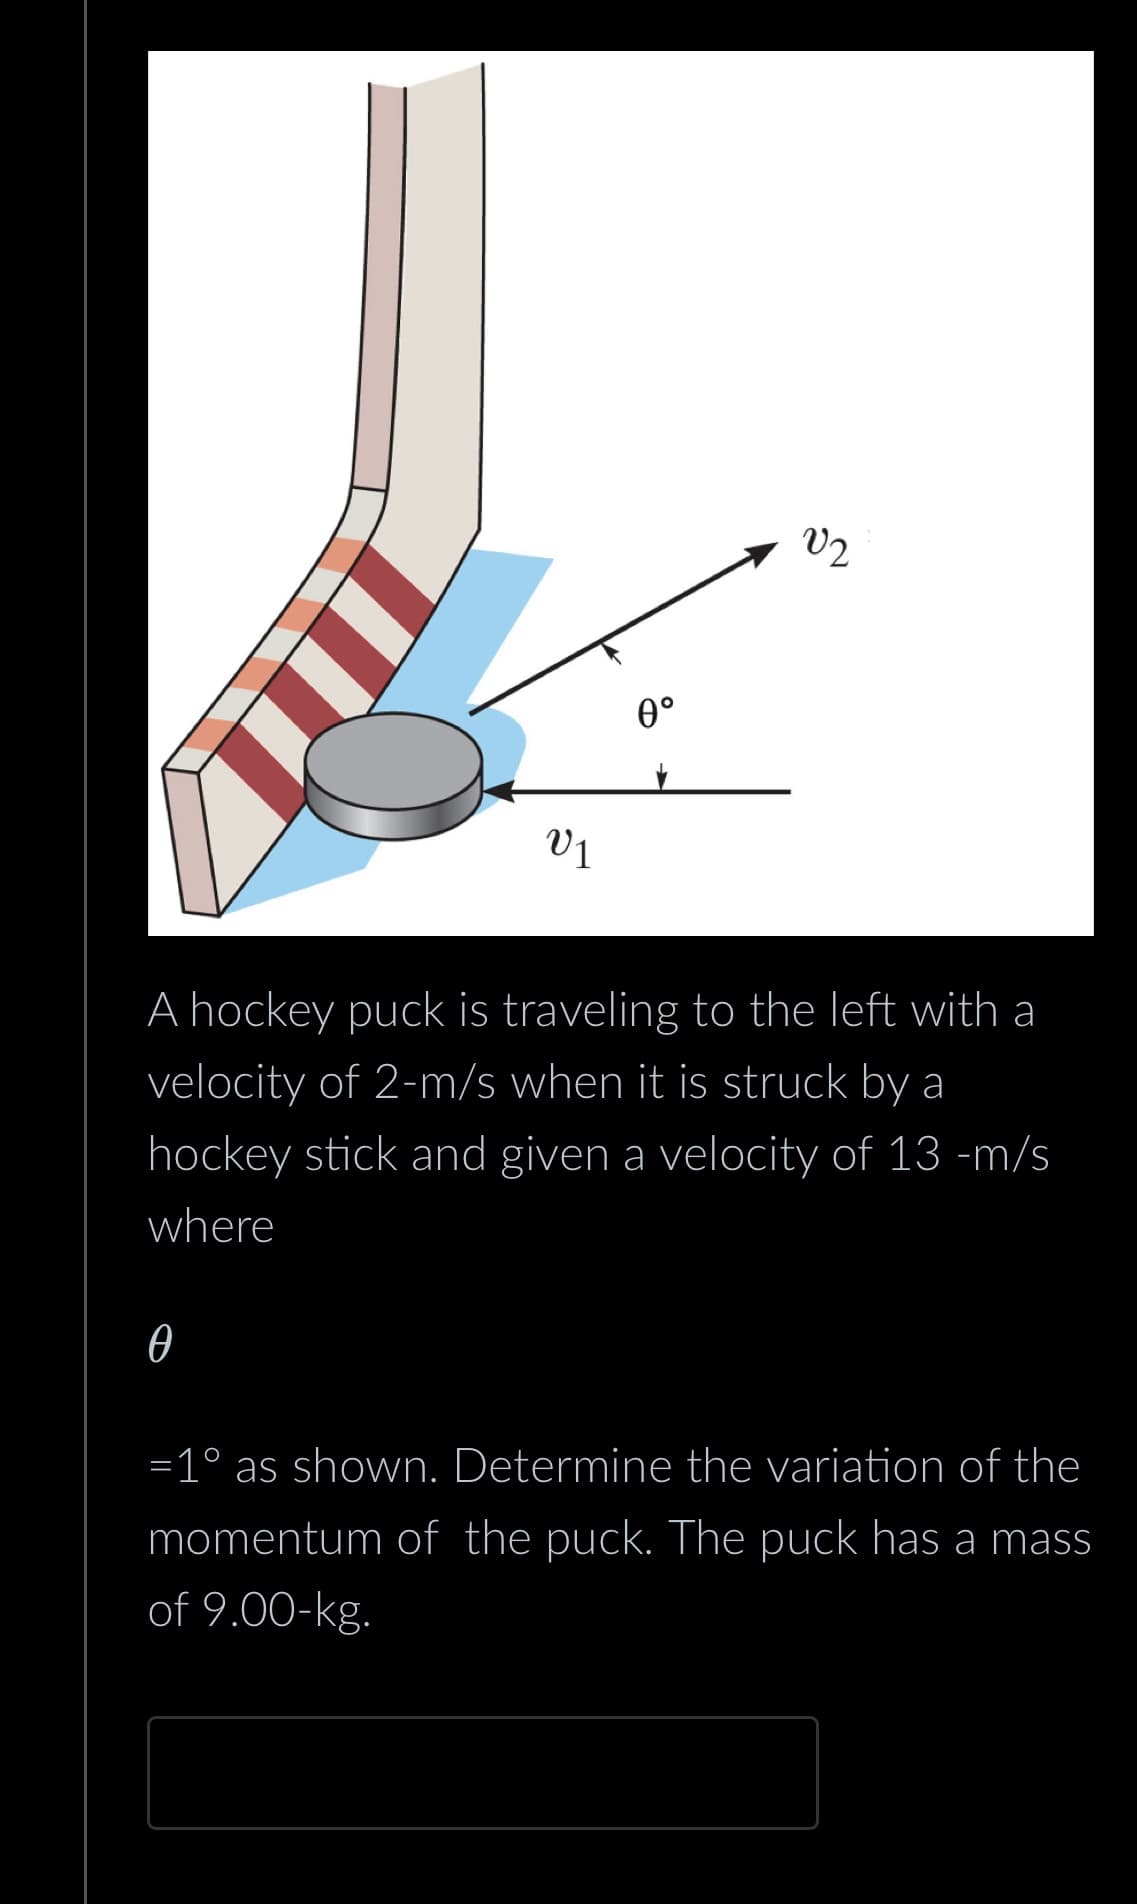 V1
Ꮎ
0°
V2
A hockey puck is traveling to the left with a
velocity of 2-m/s when it is struck by a
hockey stick and given a velocity of 13 -m/s
where
=1° as shown. Determine the variation of the
momentum of the puck. The puck has a mass
of 9.00-kg.